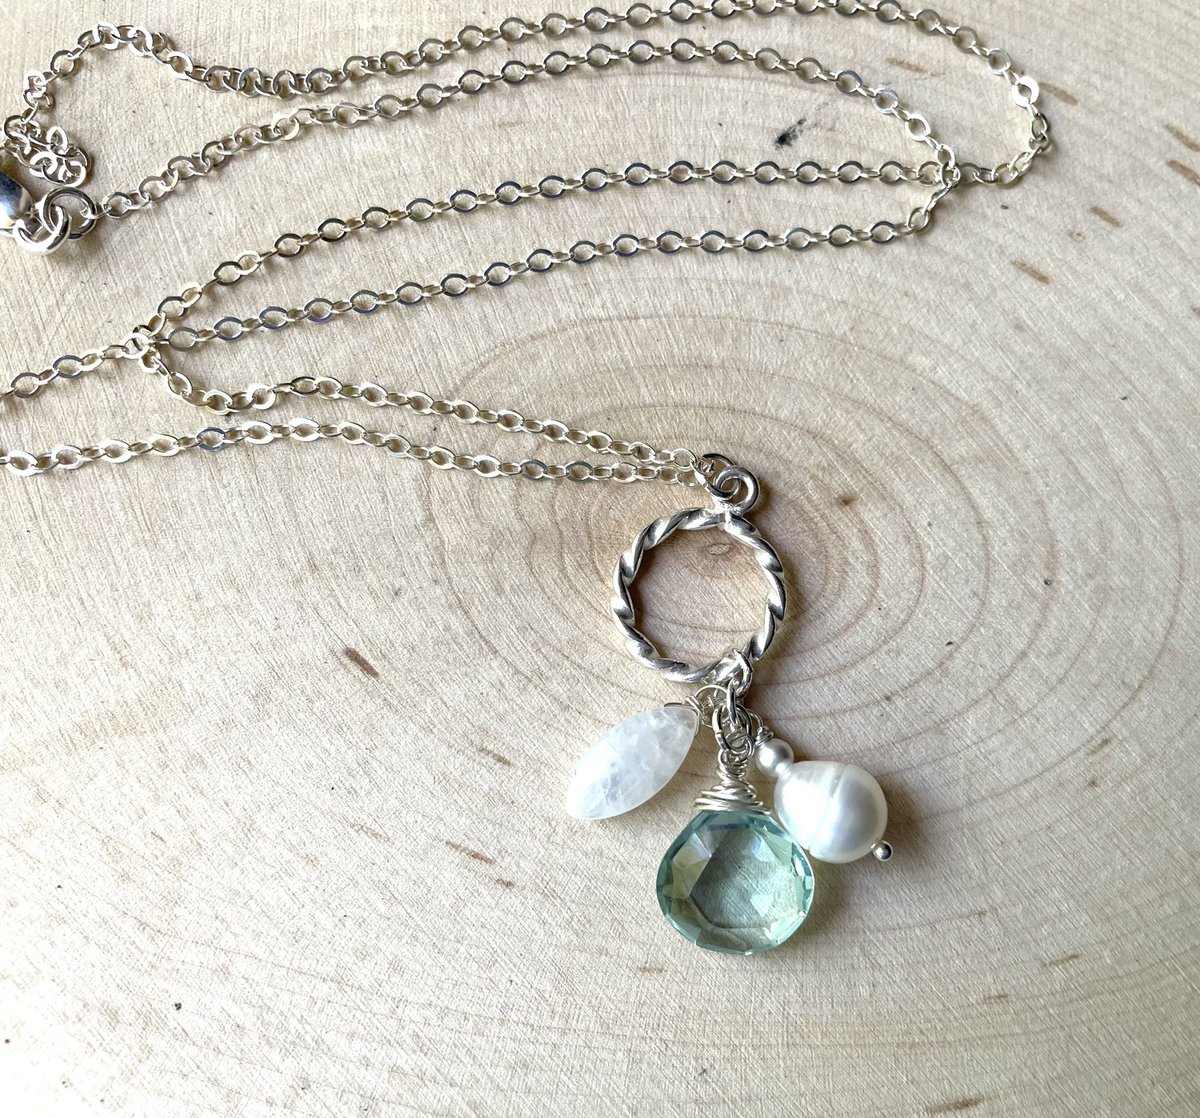 Seafoam Quartz Pearl and Moonstone Pendant Beach Inspired Necklace Nautical Gemstones on Sterling Silver Chain tuppu.net/233b0541 #Handcrafted #Jewelry trends #JemsbyJBandCompany